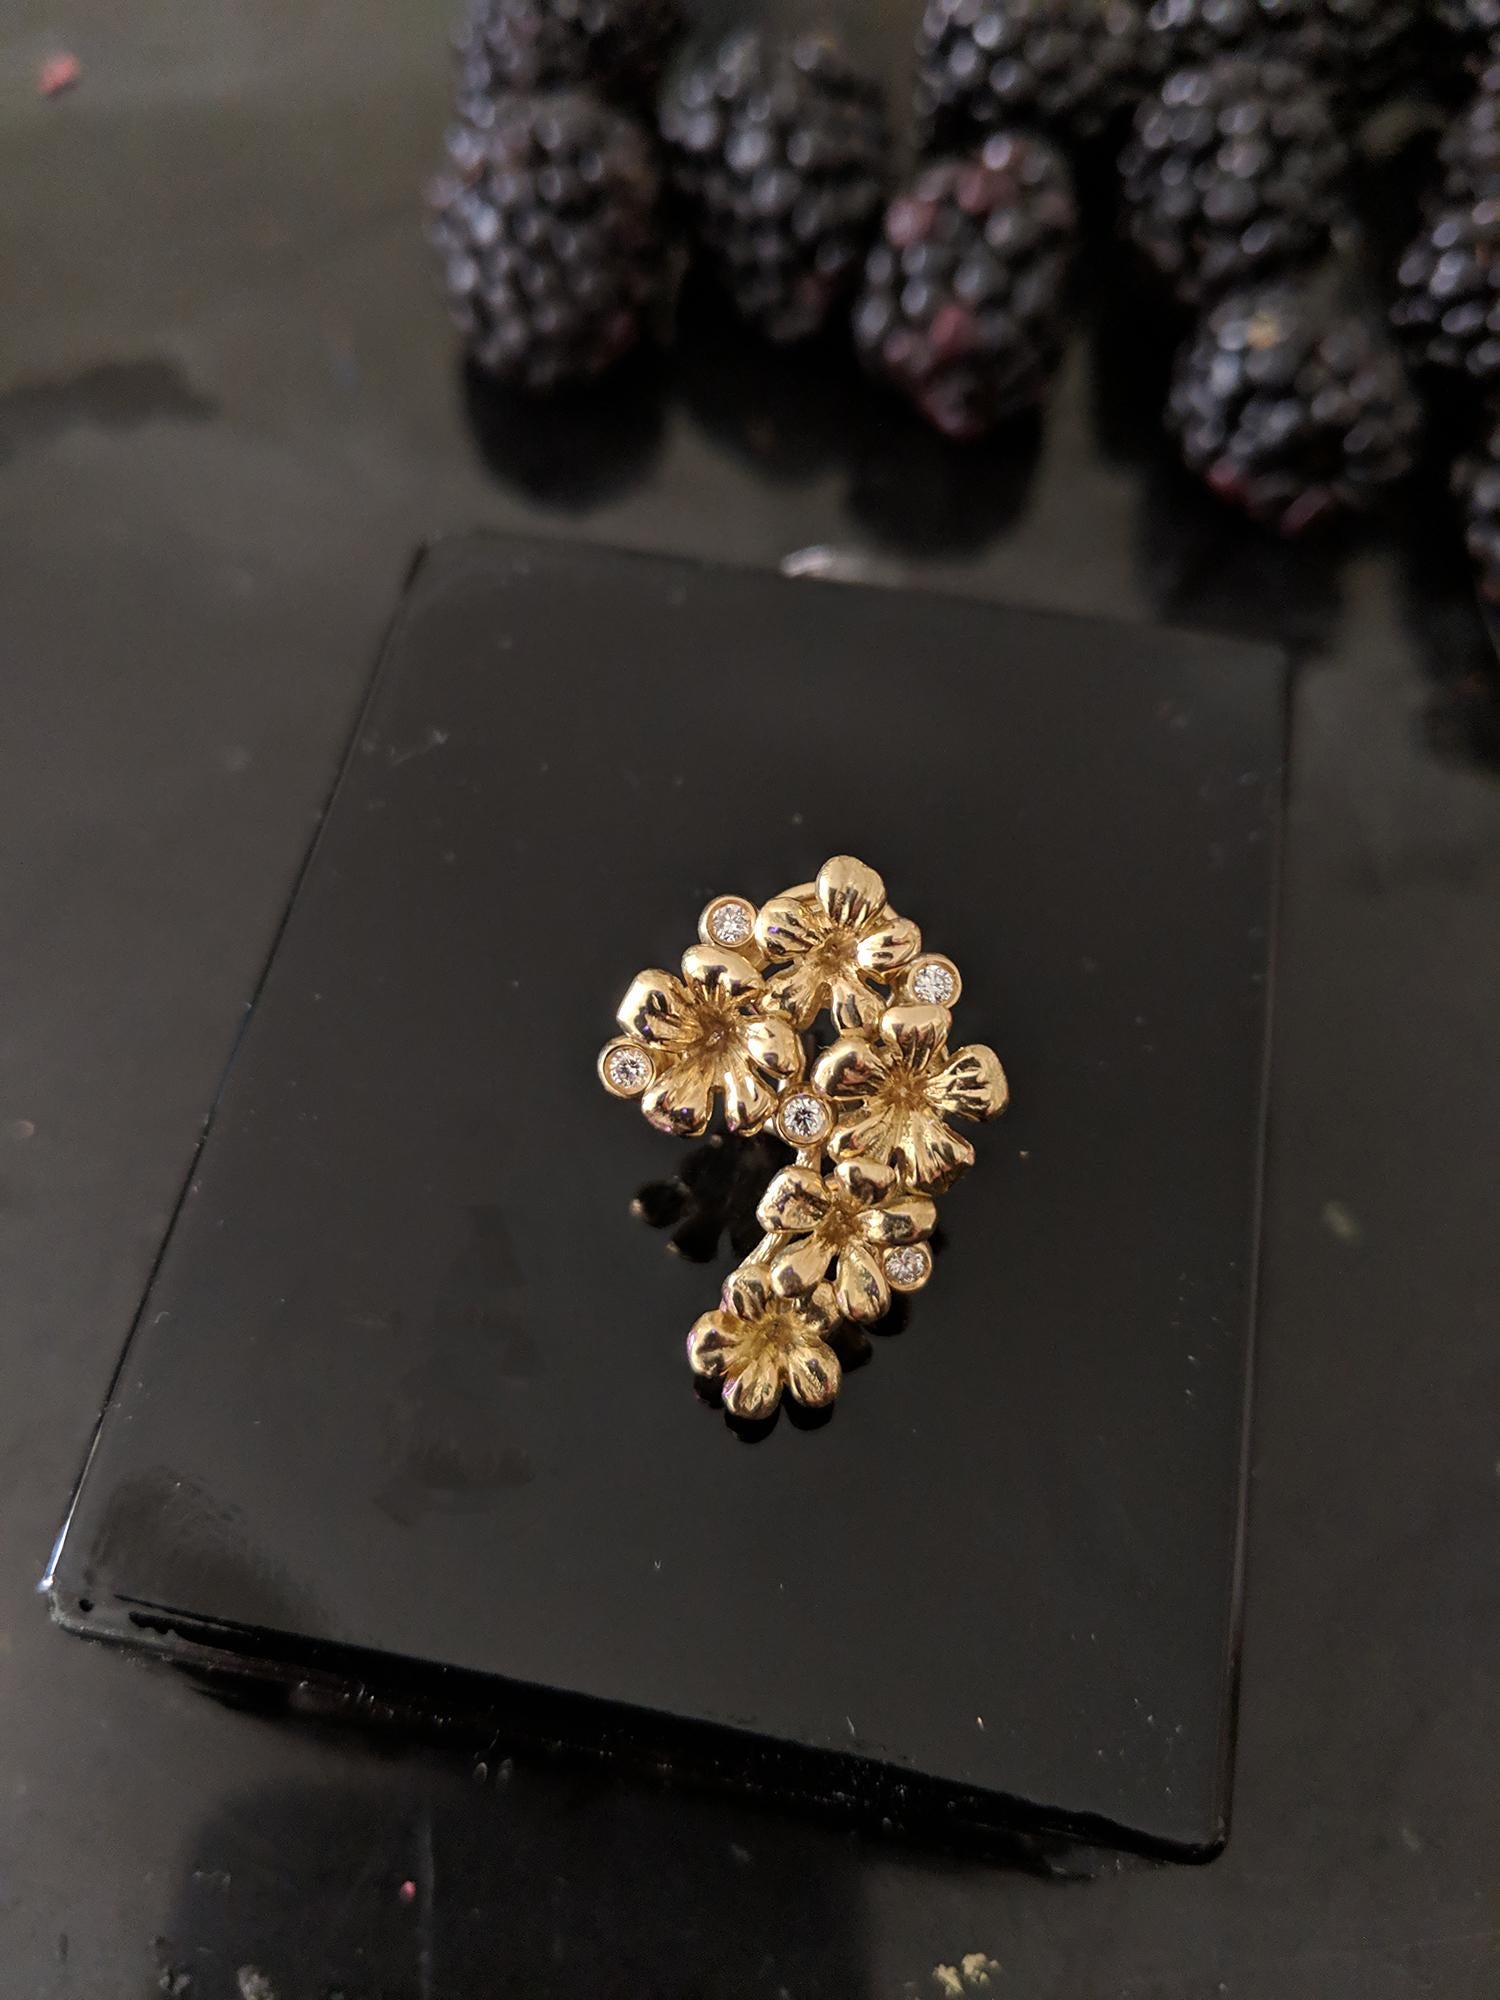 The Plum Blossom Modern Style Pendant Necklace is made in 18 karat yellow gold. It features 5 round diamonds and a removable drop of natural rose tourmaline, which can be taken off. This beautiful piece of jewelry was featured in Vogue UA and was